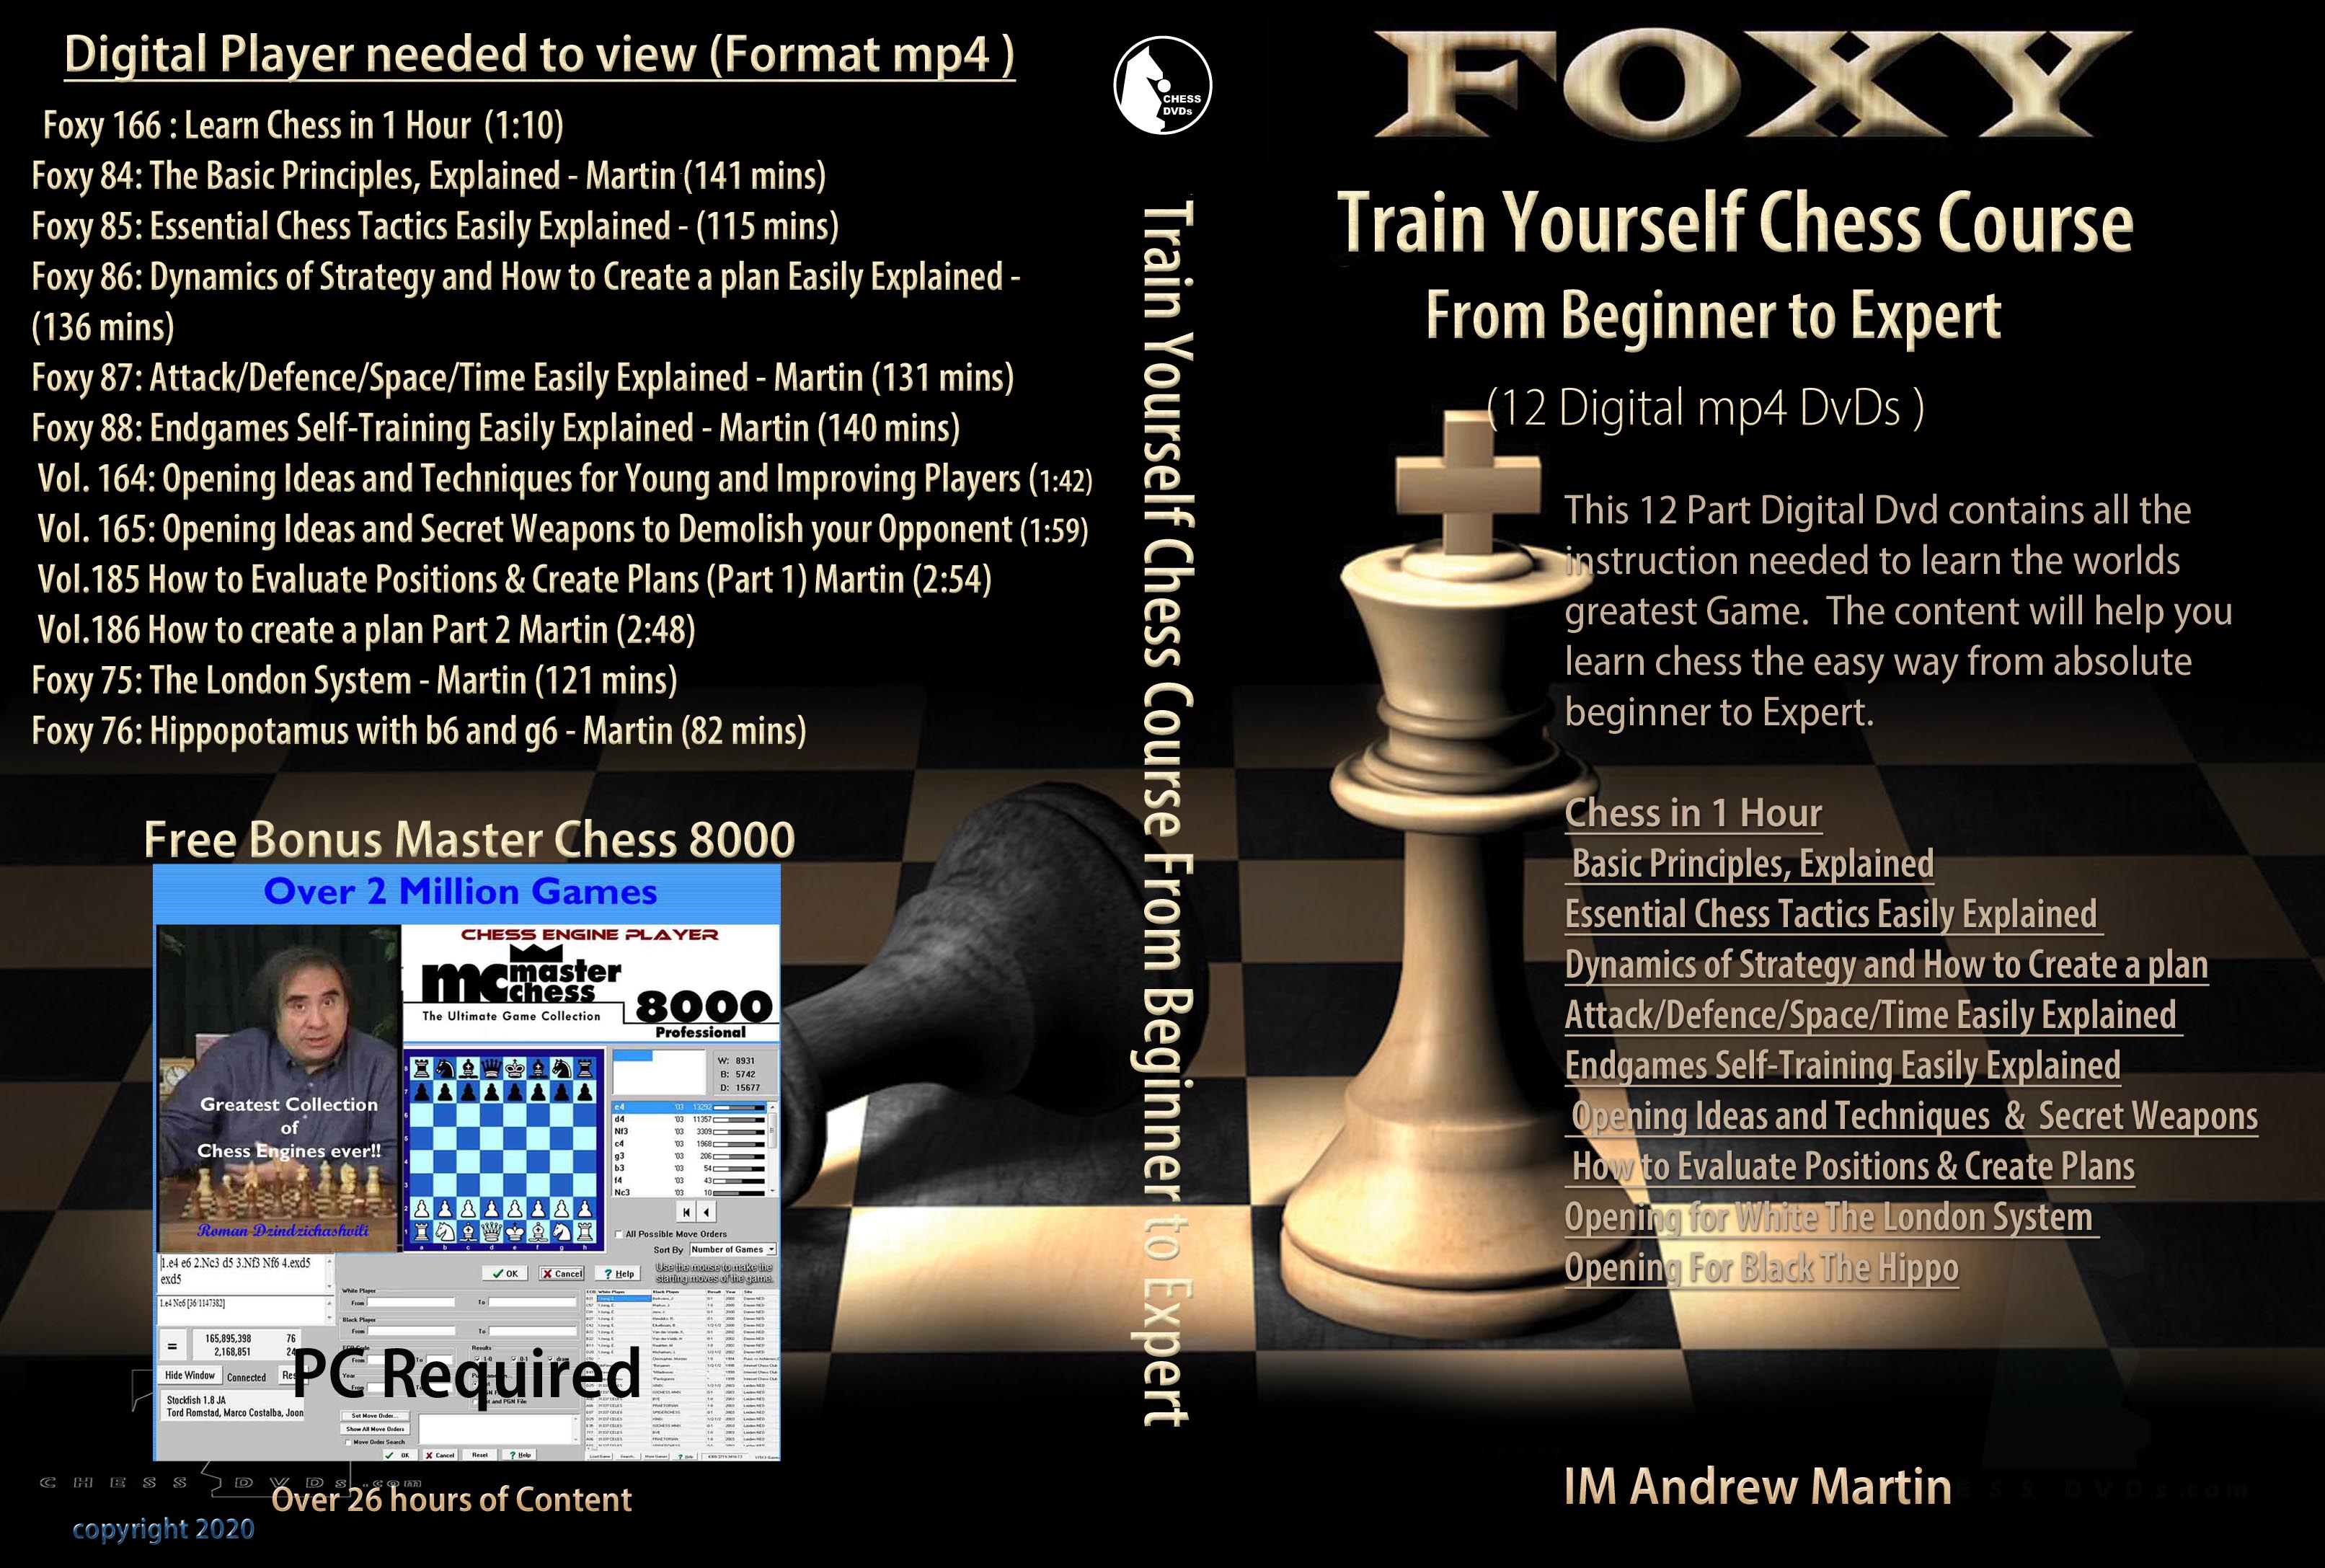 Train Yourself Chess Course From Beginner to Expert